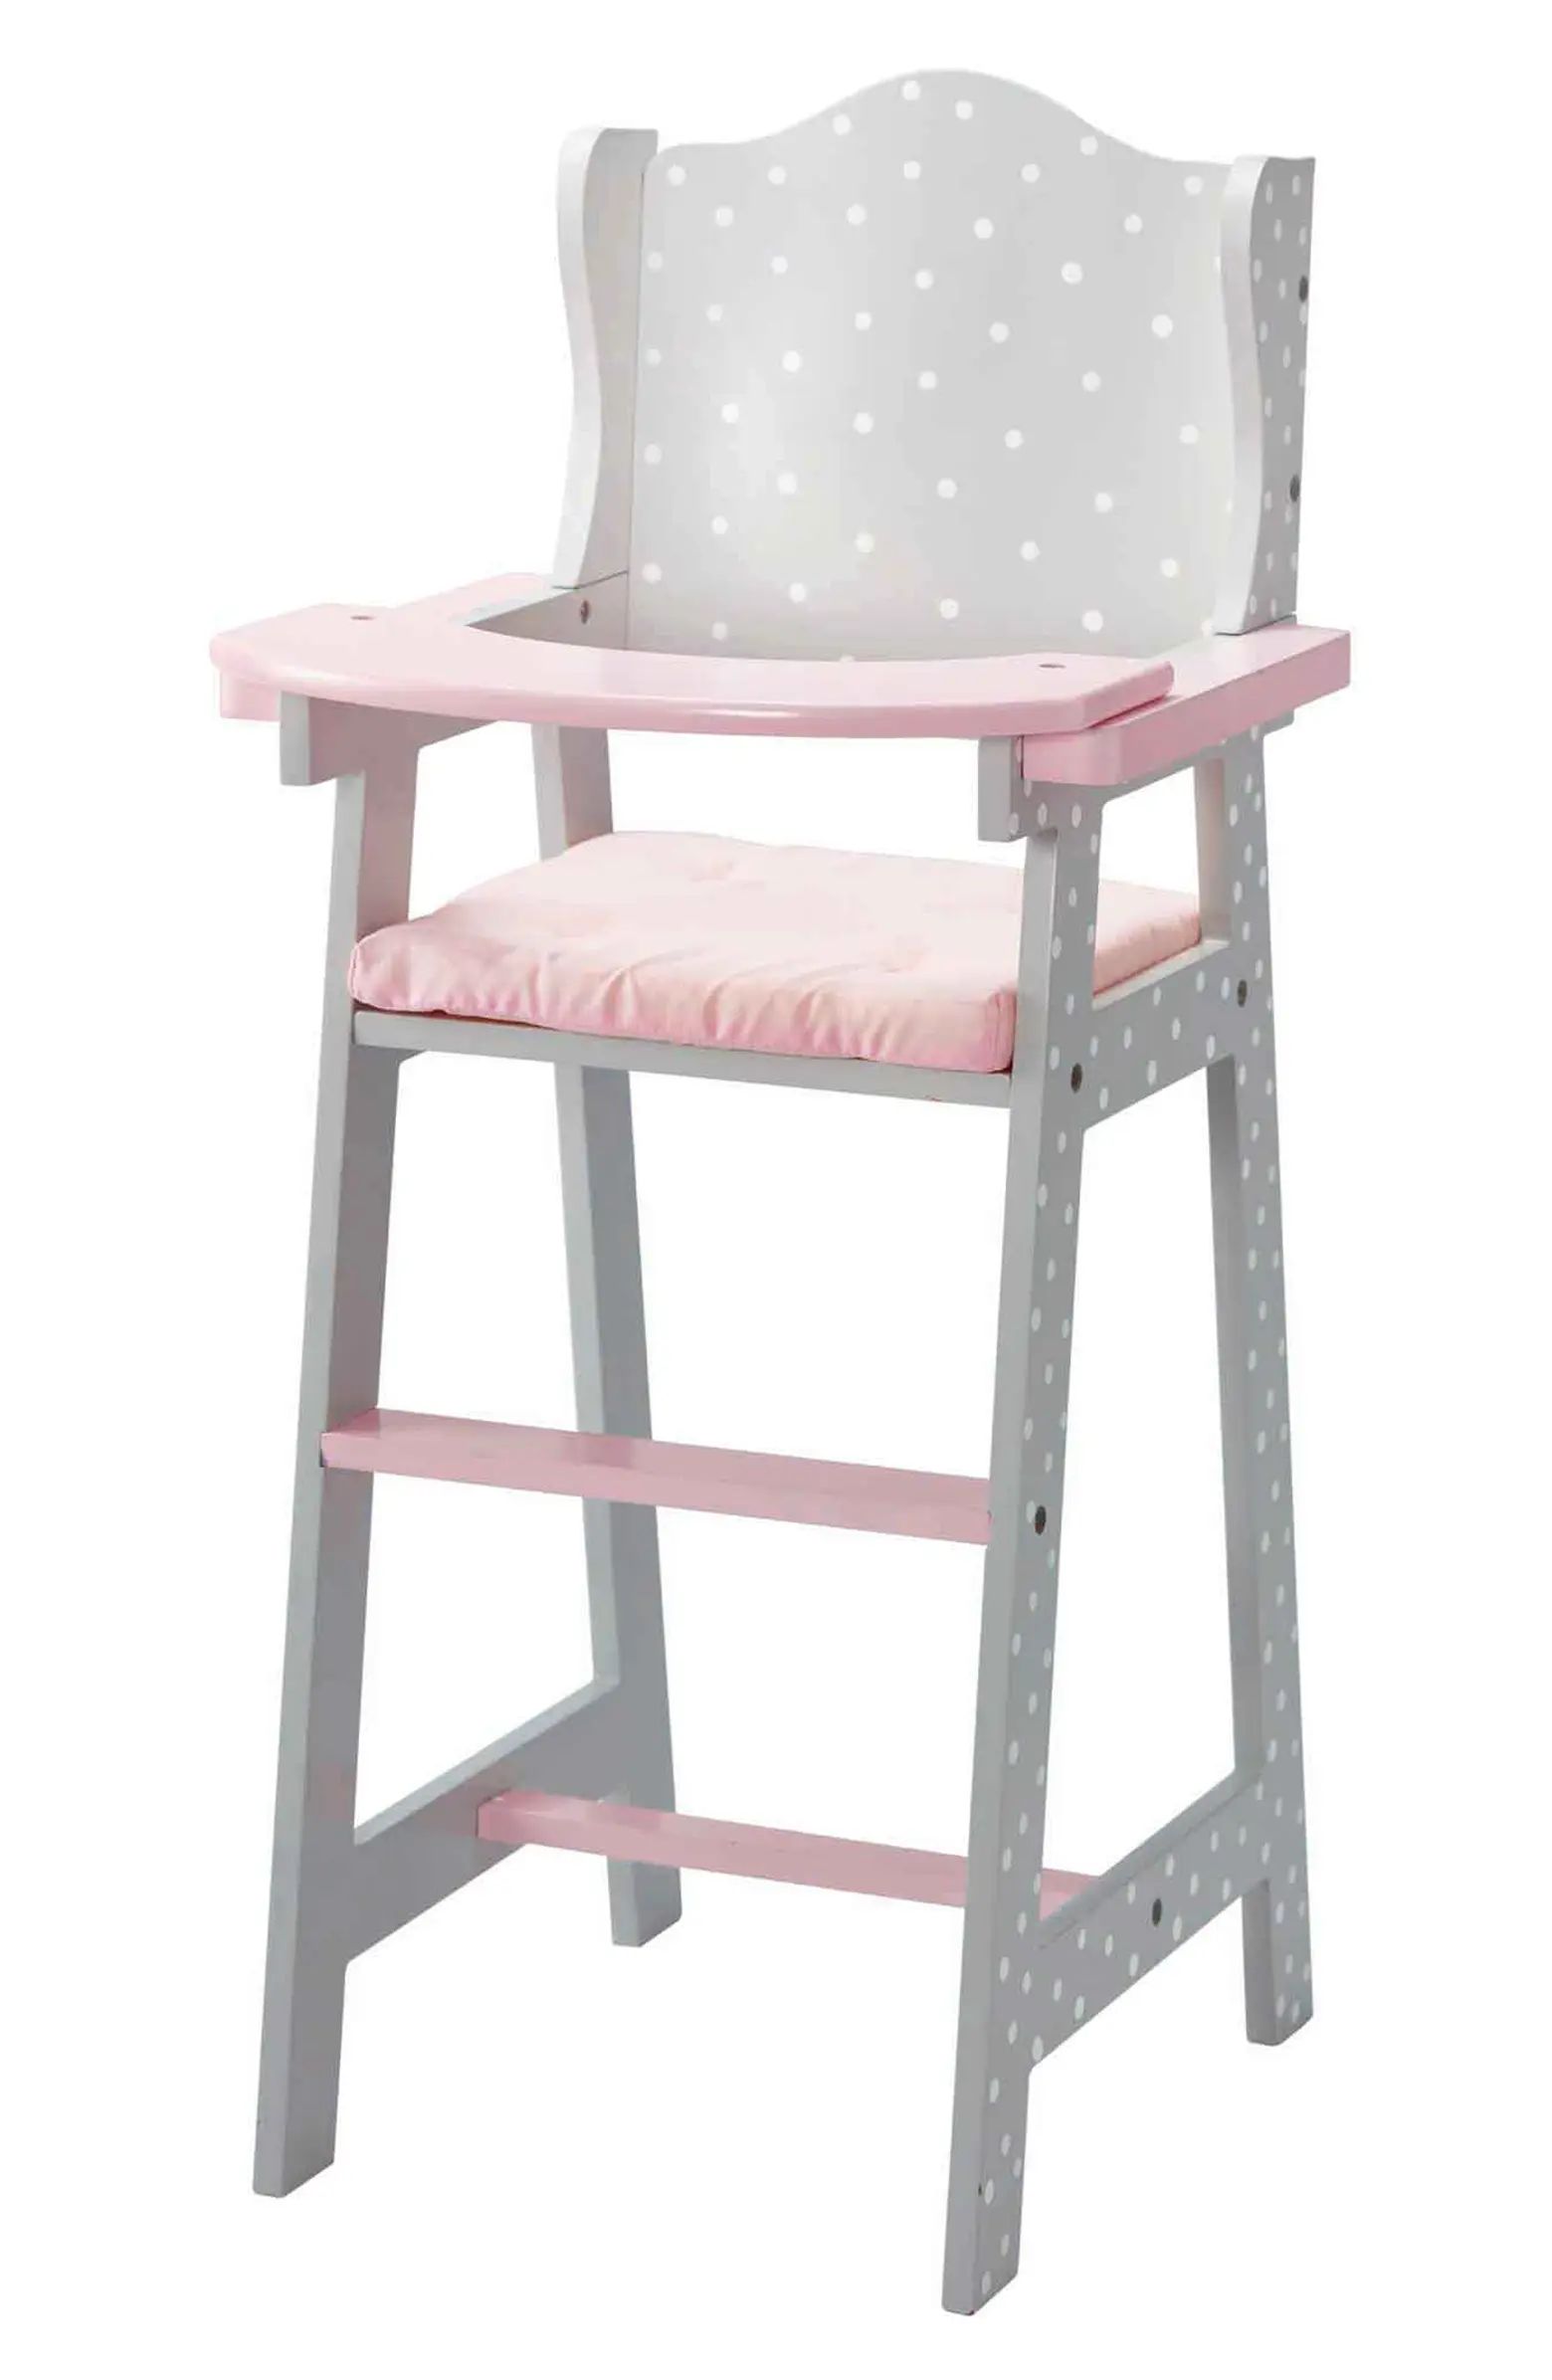 Olivia's Little World Baby Doll High Chair | Nordstrom